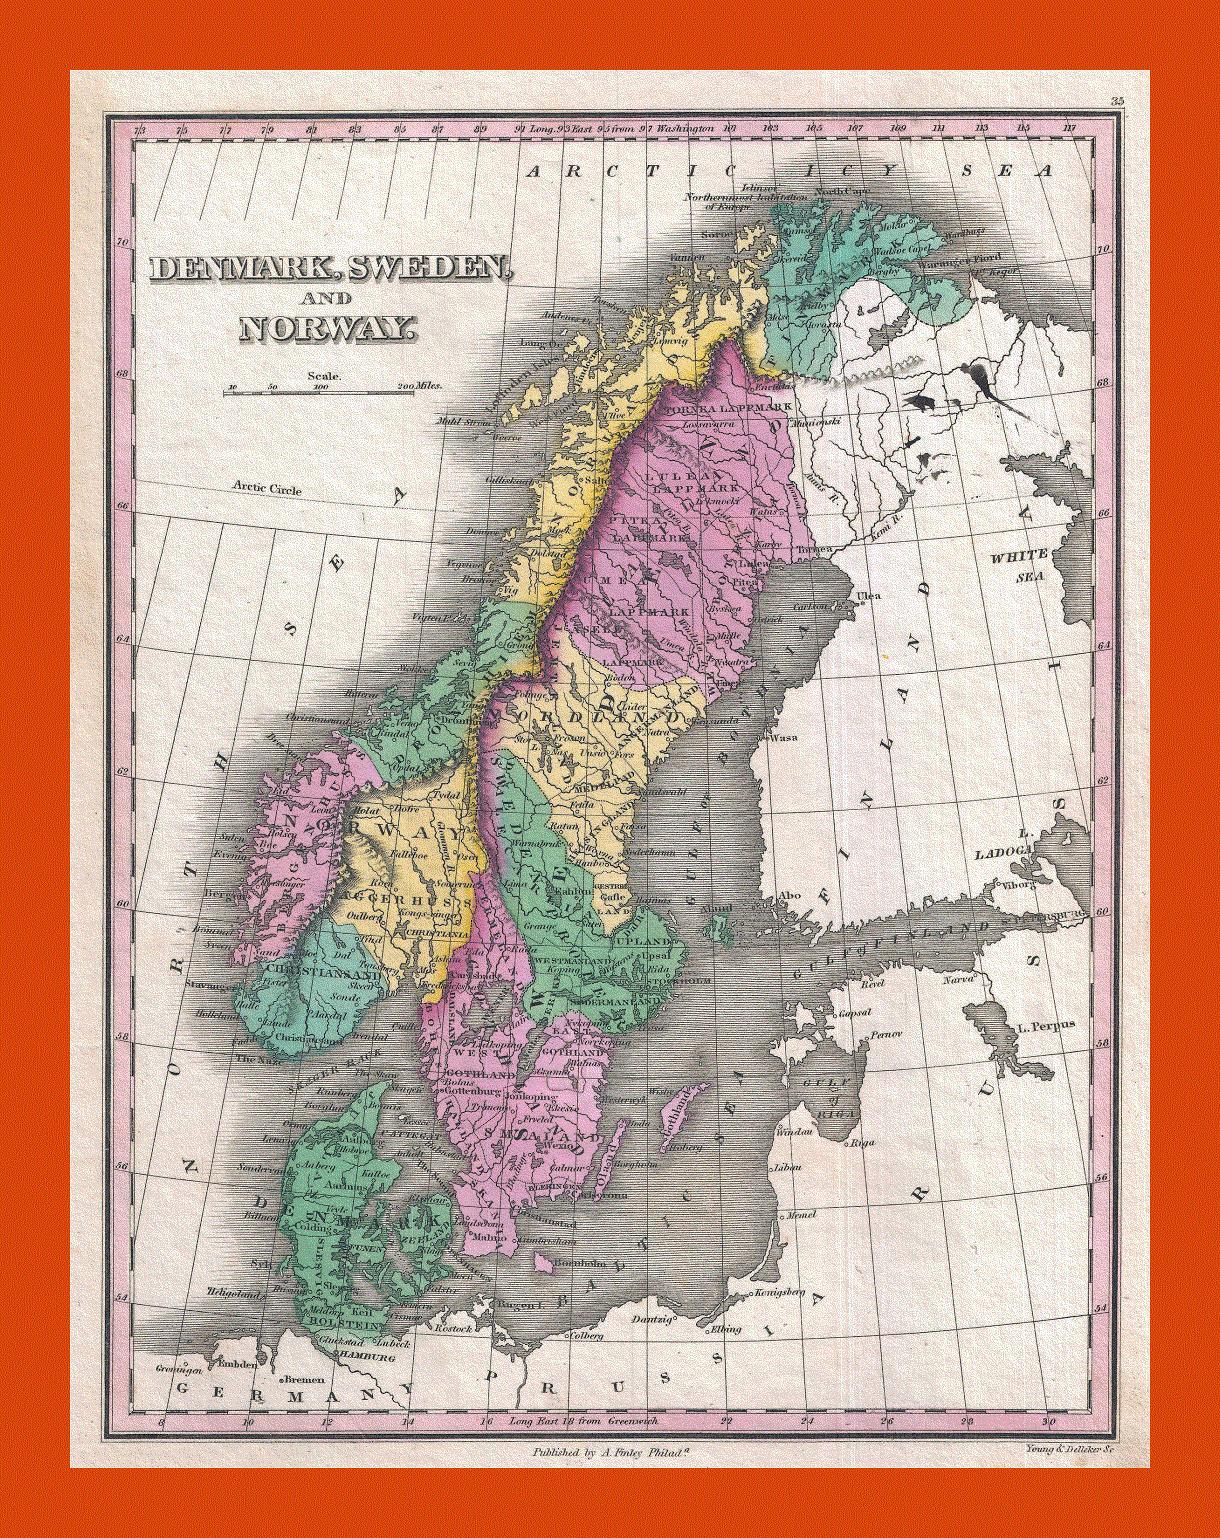 Old political and administrative map of Denmark, Sweden and Norway - 1827